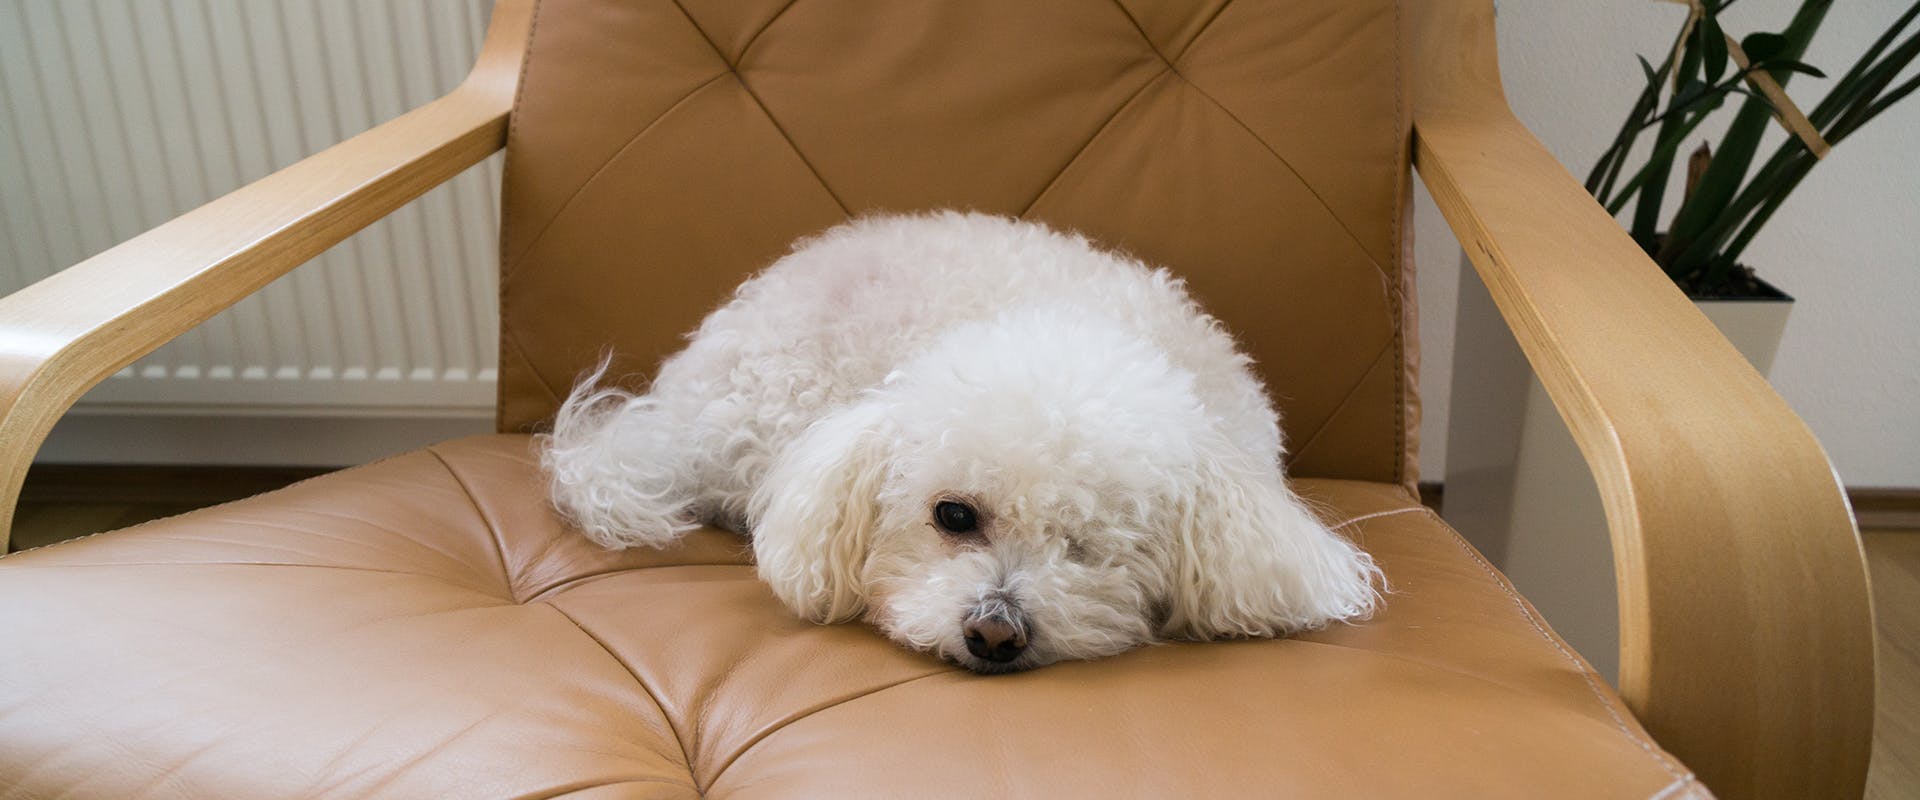 A Bichon Frise sitting on a large leather arm chair